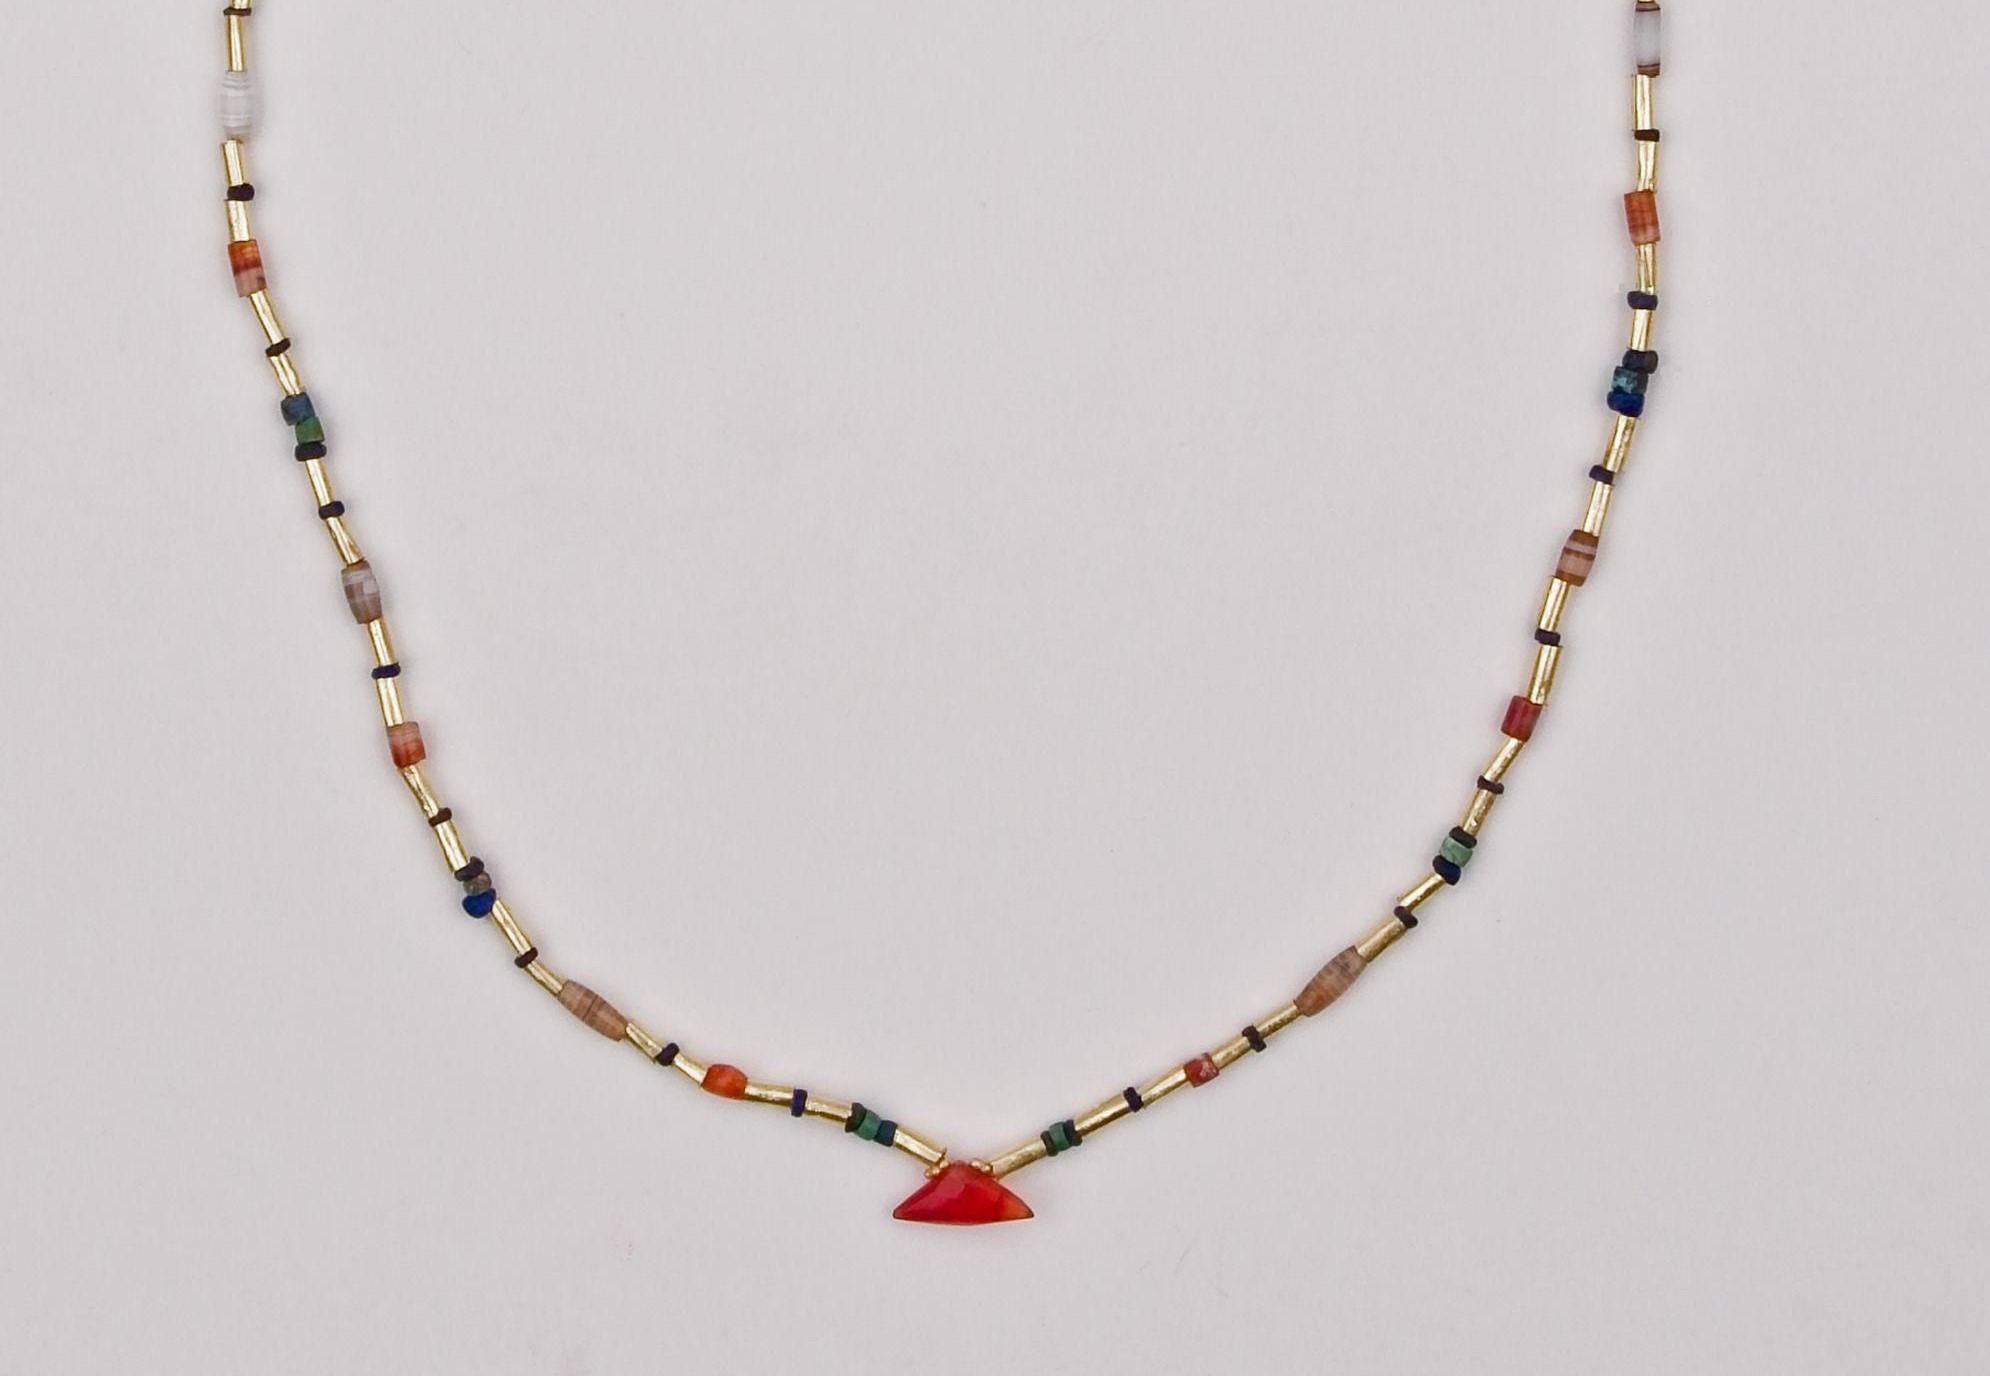 Artist Ancient Lapis, Agate, Carnelian, and Turquoise Beads with 22k Gold and Pendant For Sale